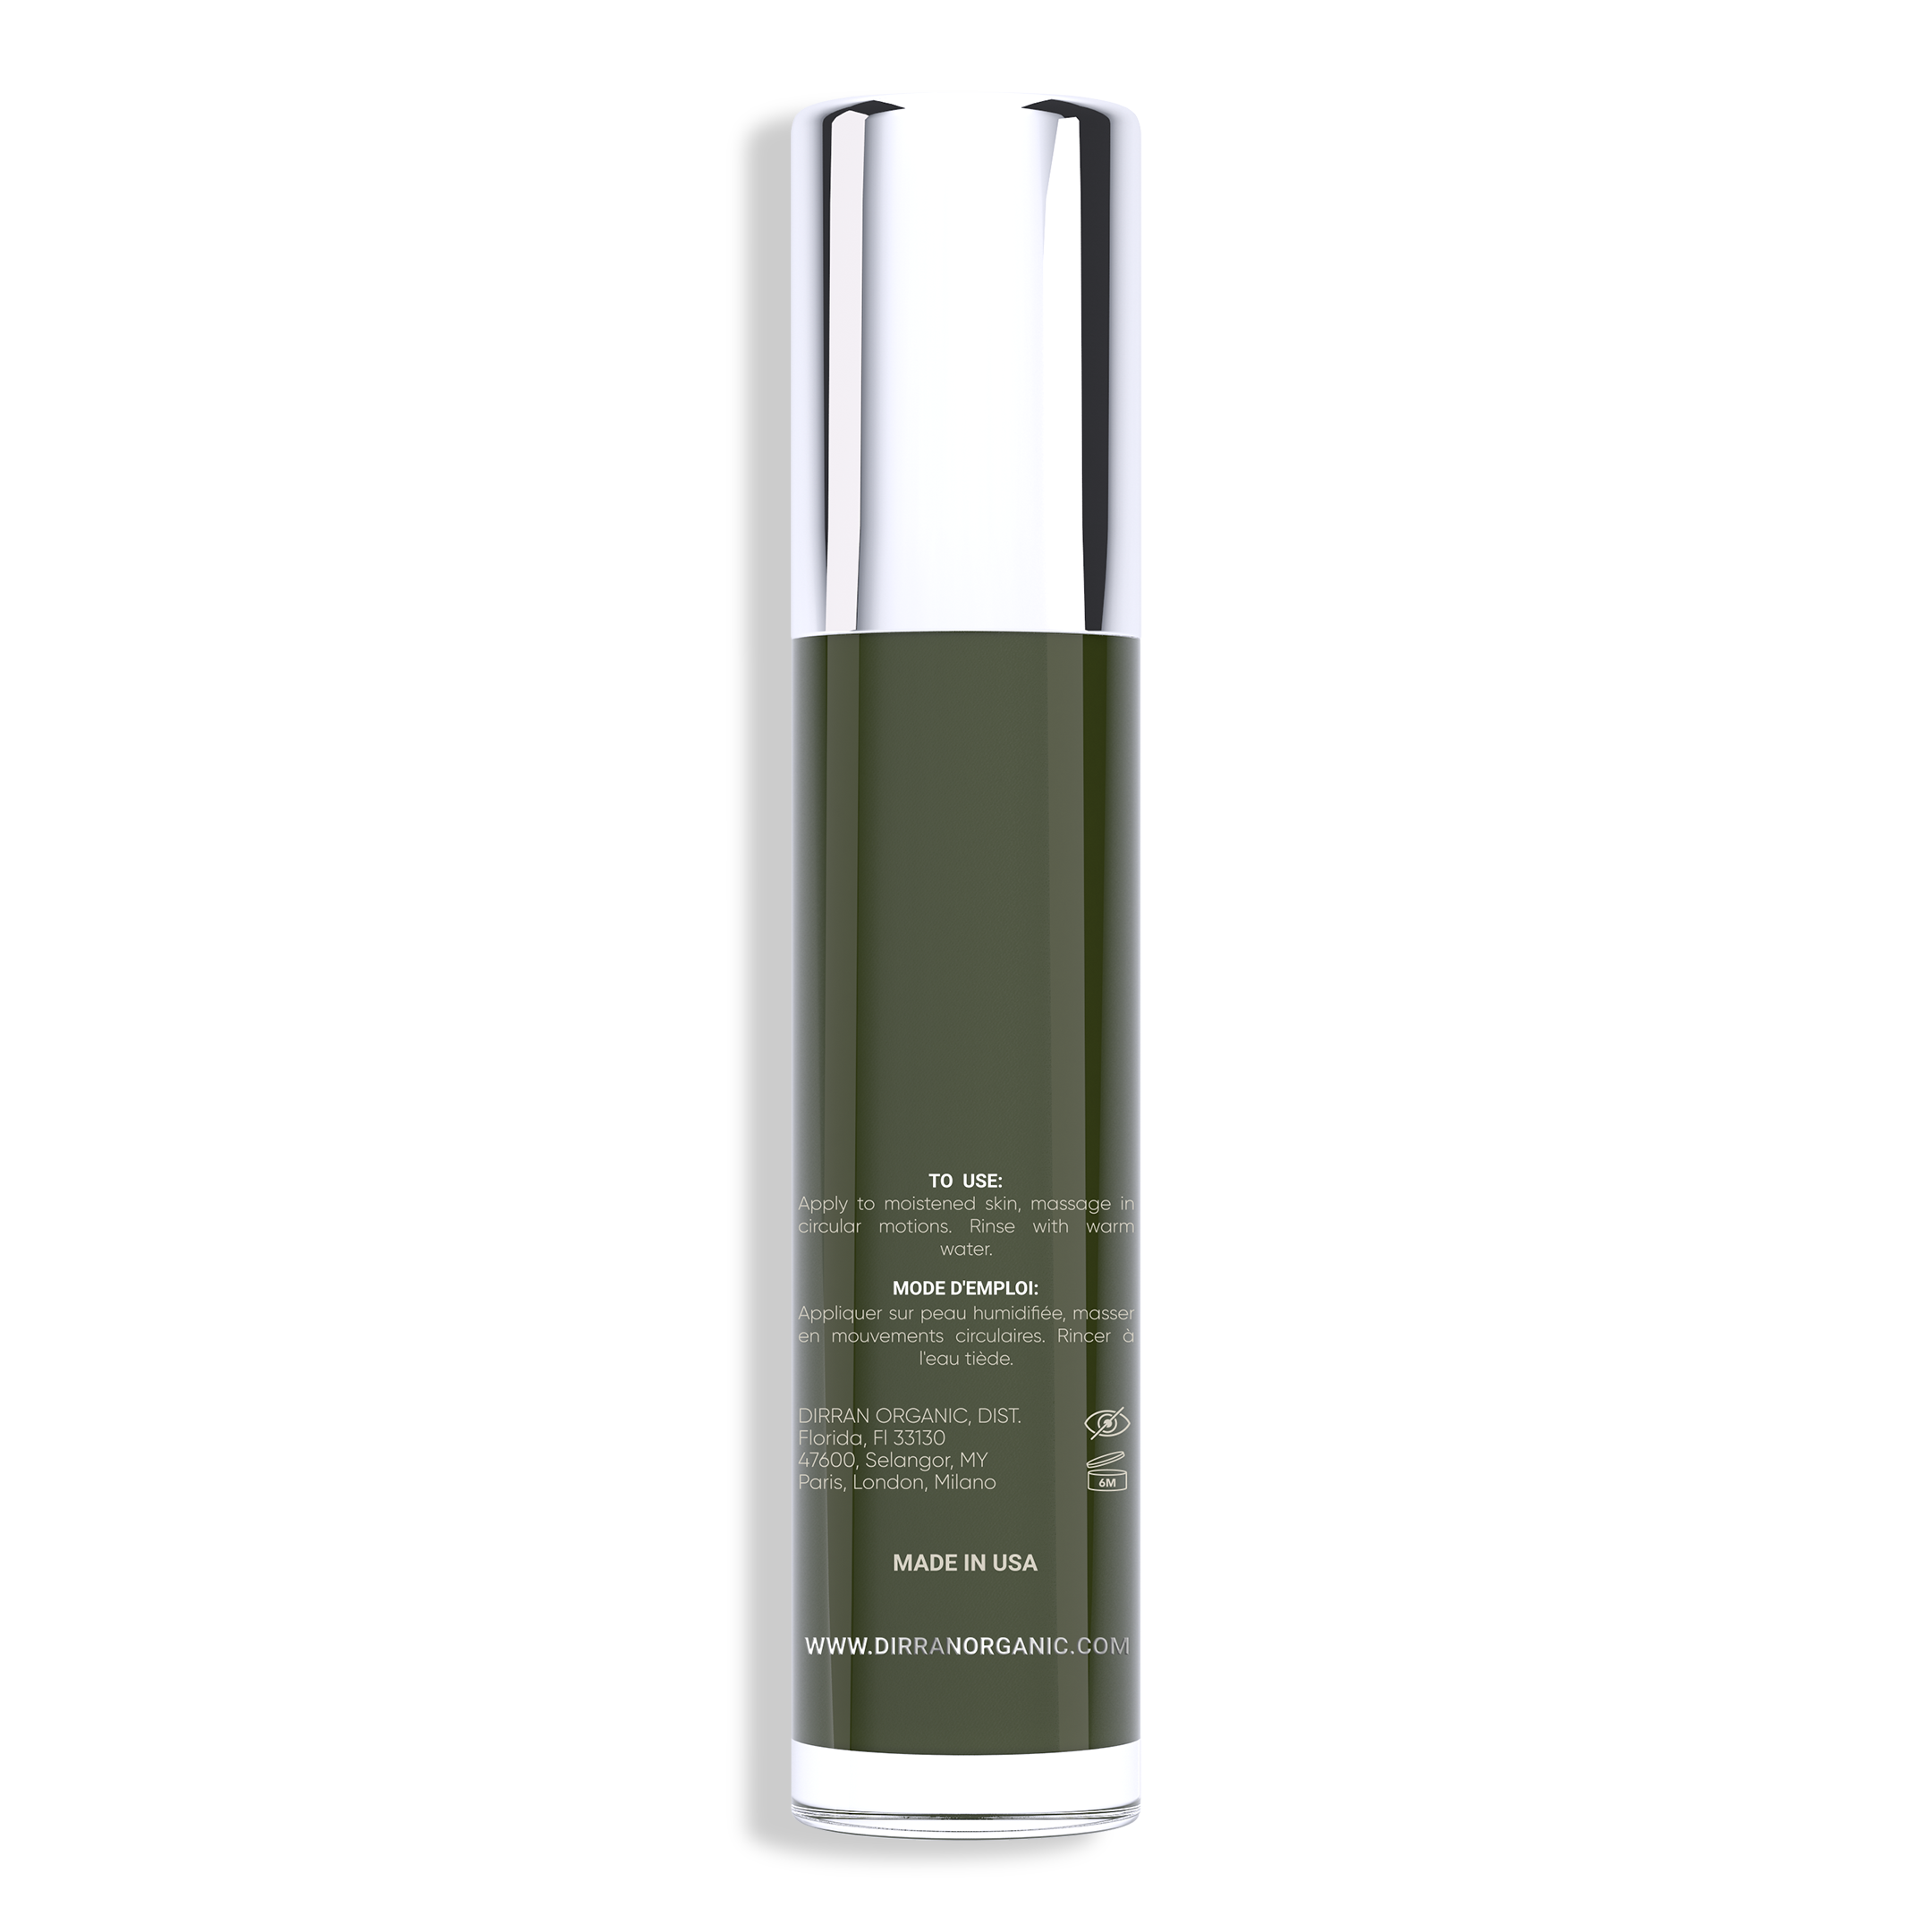 HYDRATION CLEANSER Repair and Nourish the skin